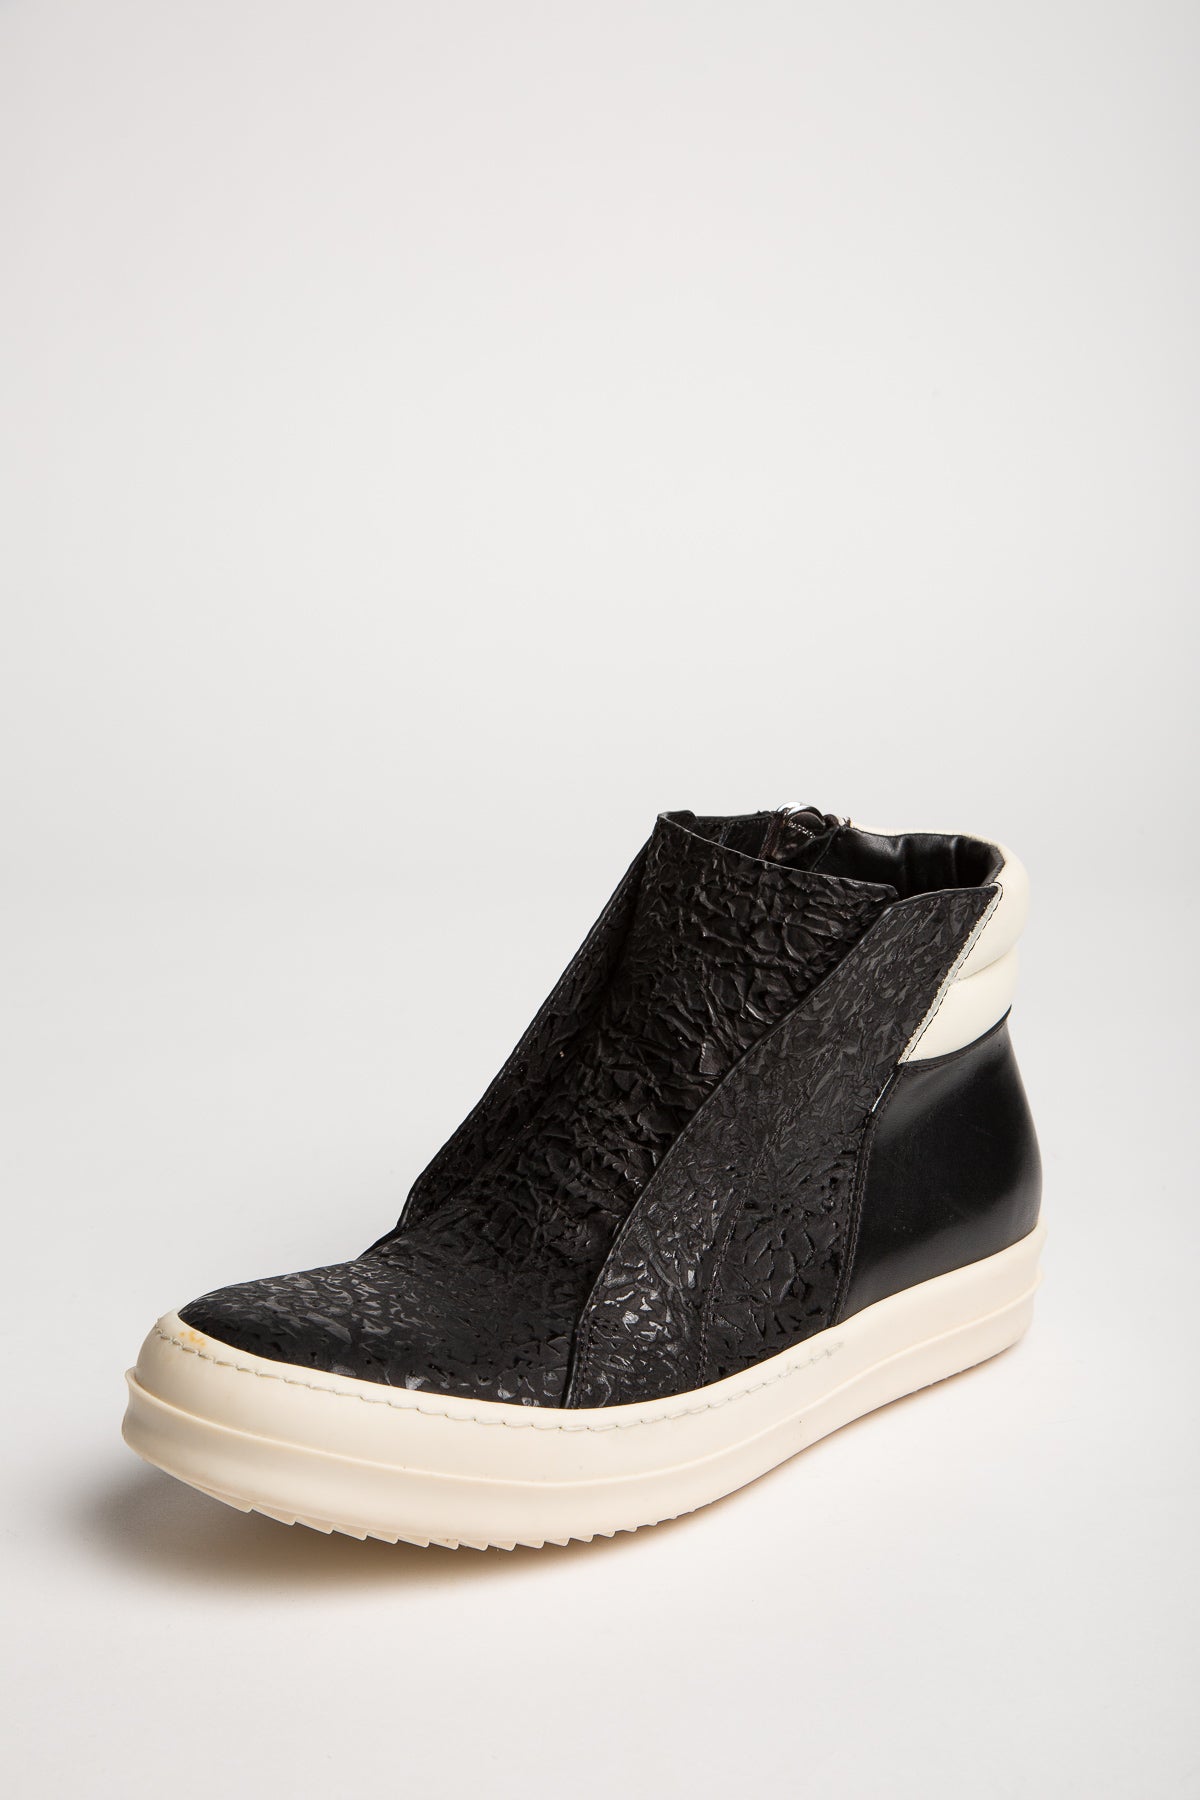 RICK OWENS | ISLAND DUNK COMBO SNEAKERS